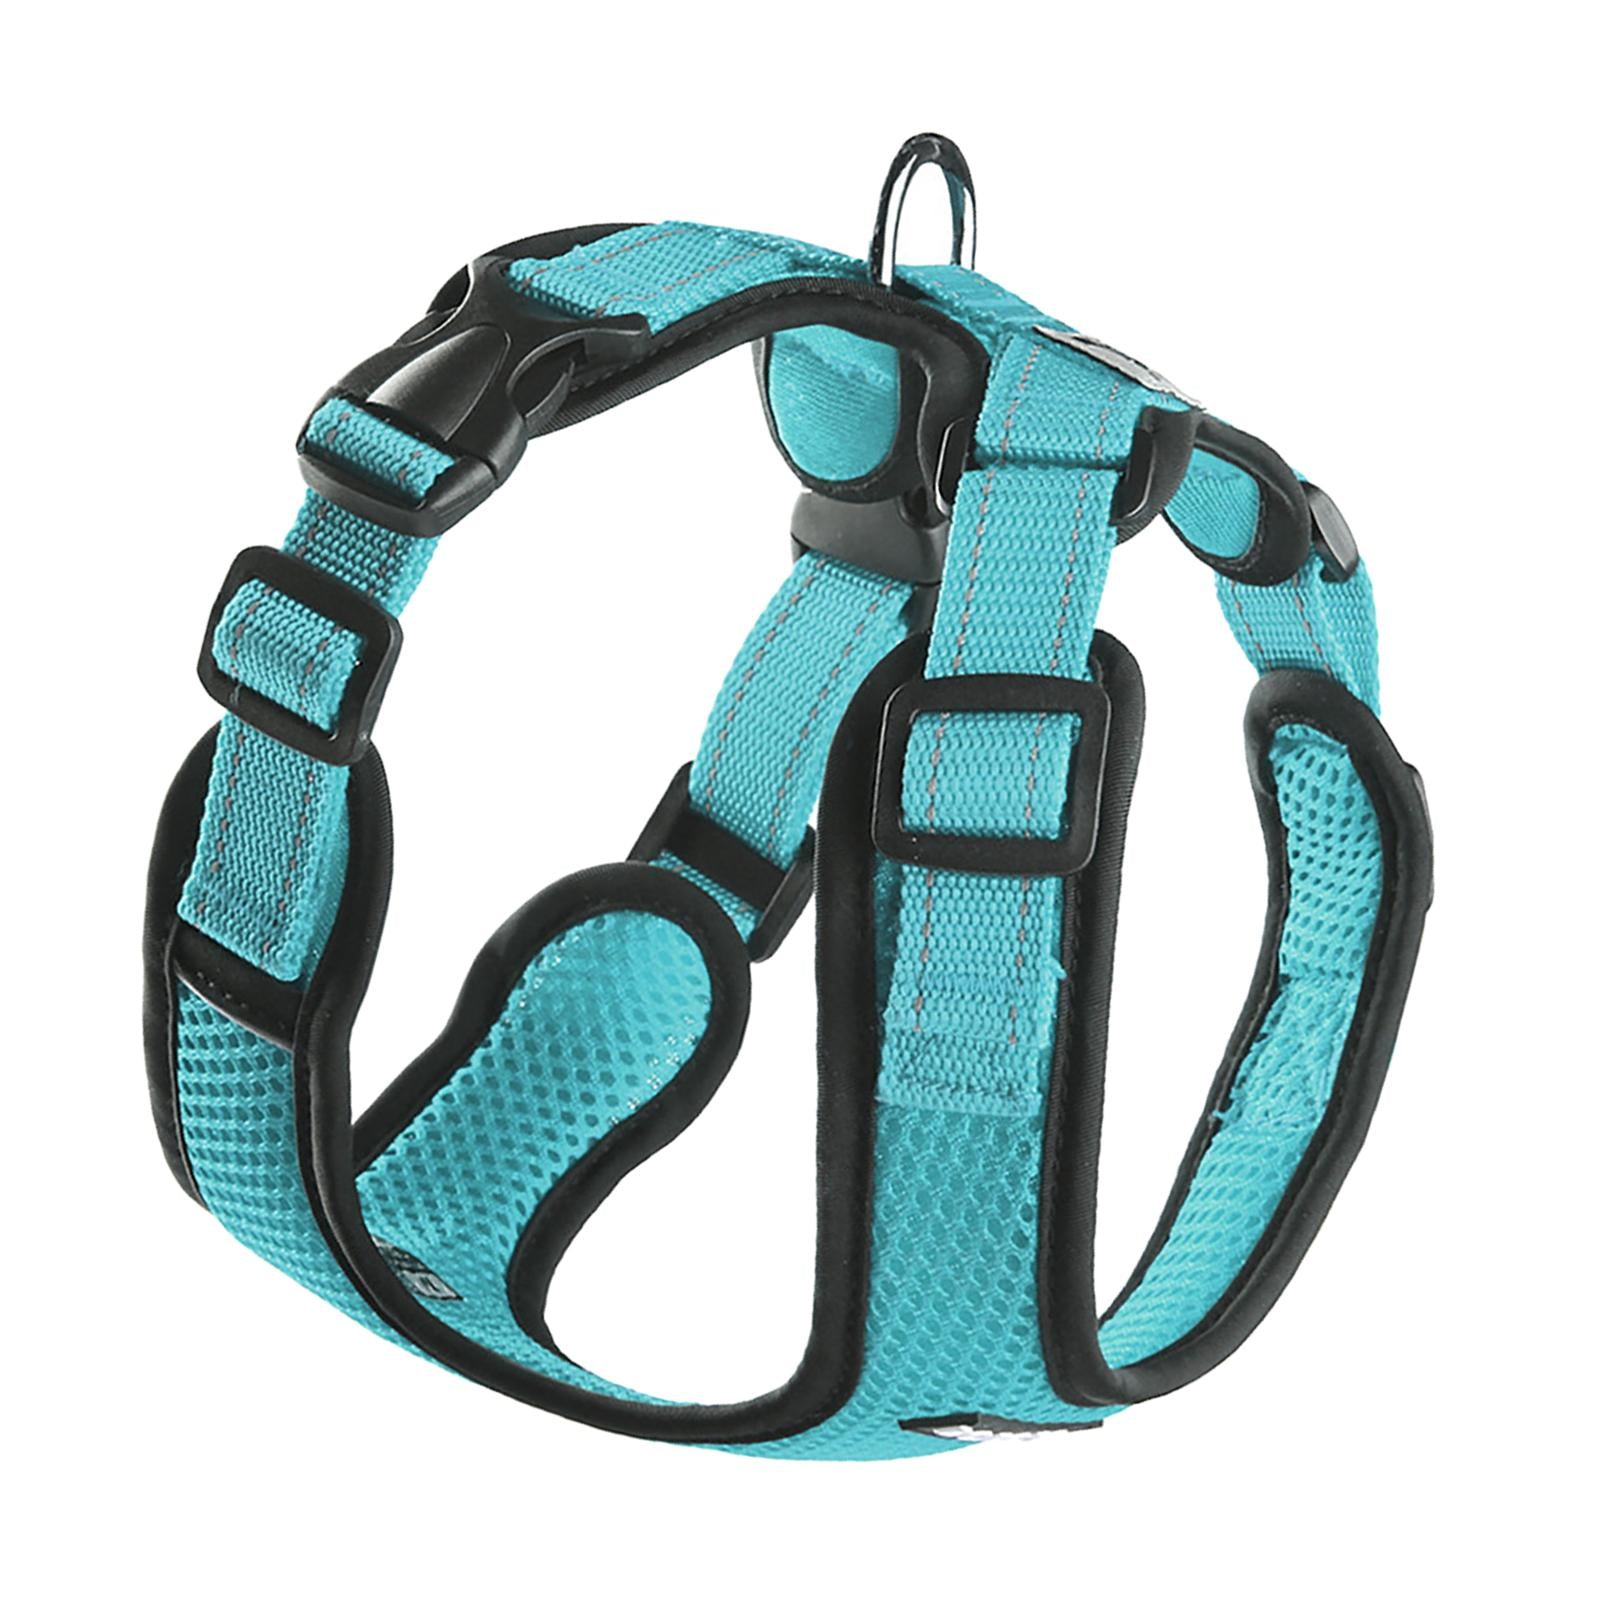 Reflective Dog Harness No Pull Vest Rope for Running Outdoor Lead Walking Blue XL